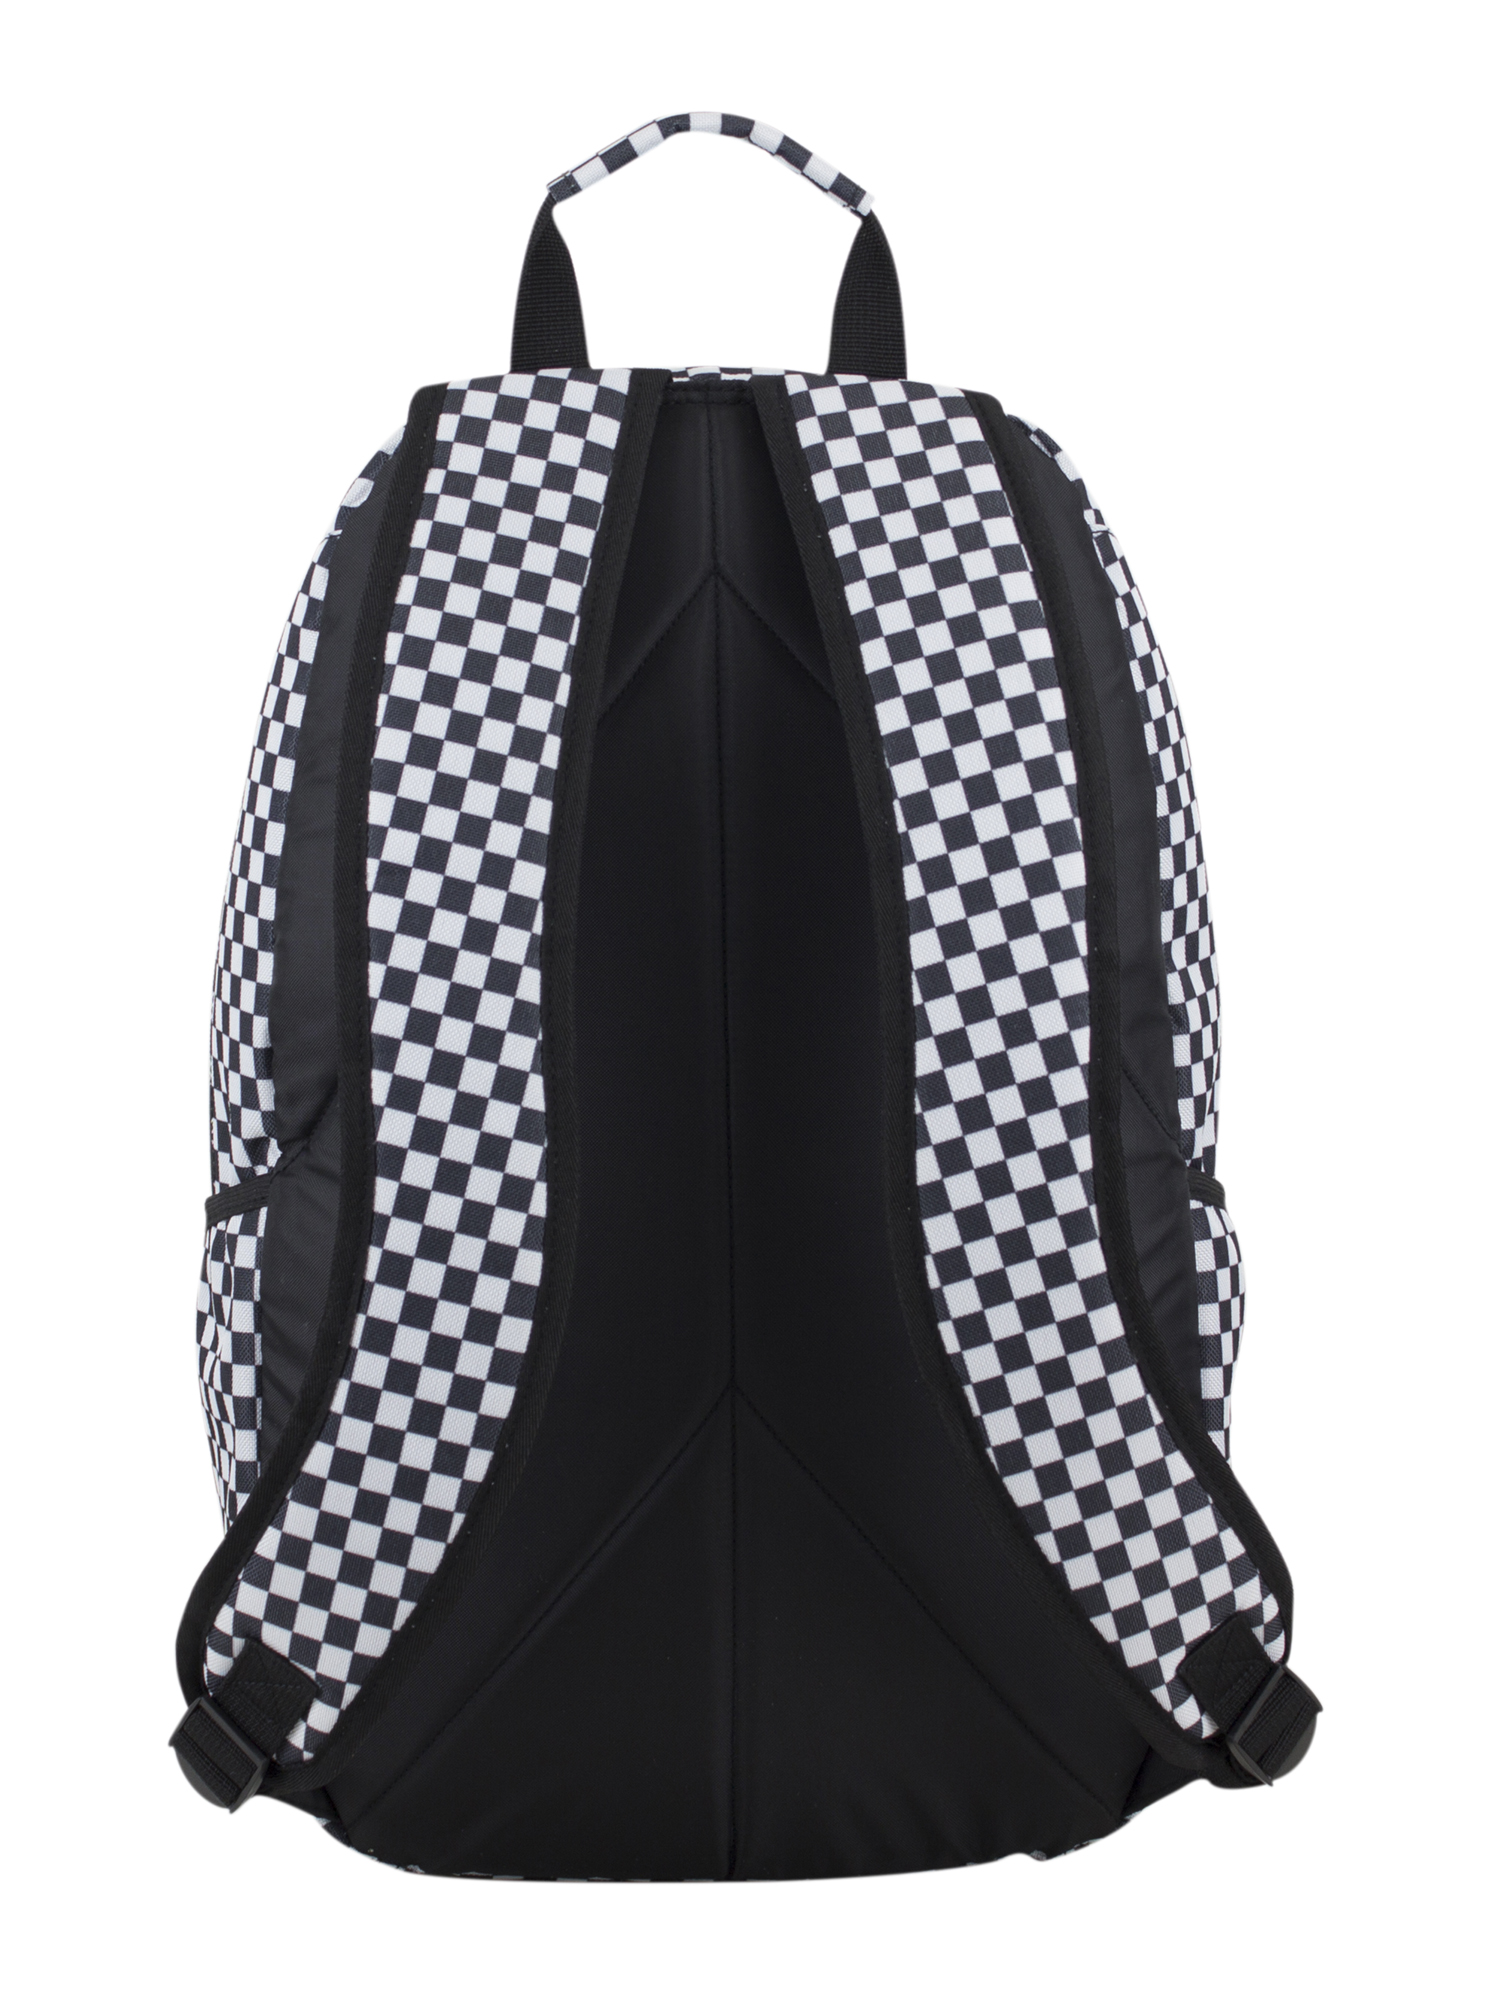 Eastsport Sport Tier Athleisure Checker Plaid Backpack with Adjustable Straps - image 4 of 7